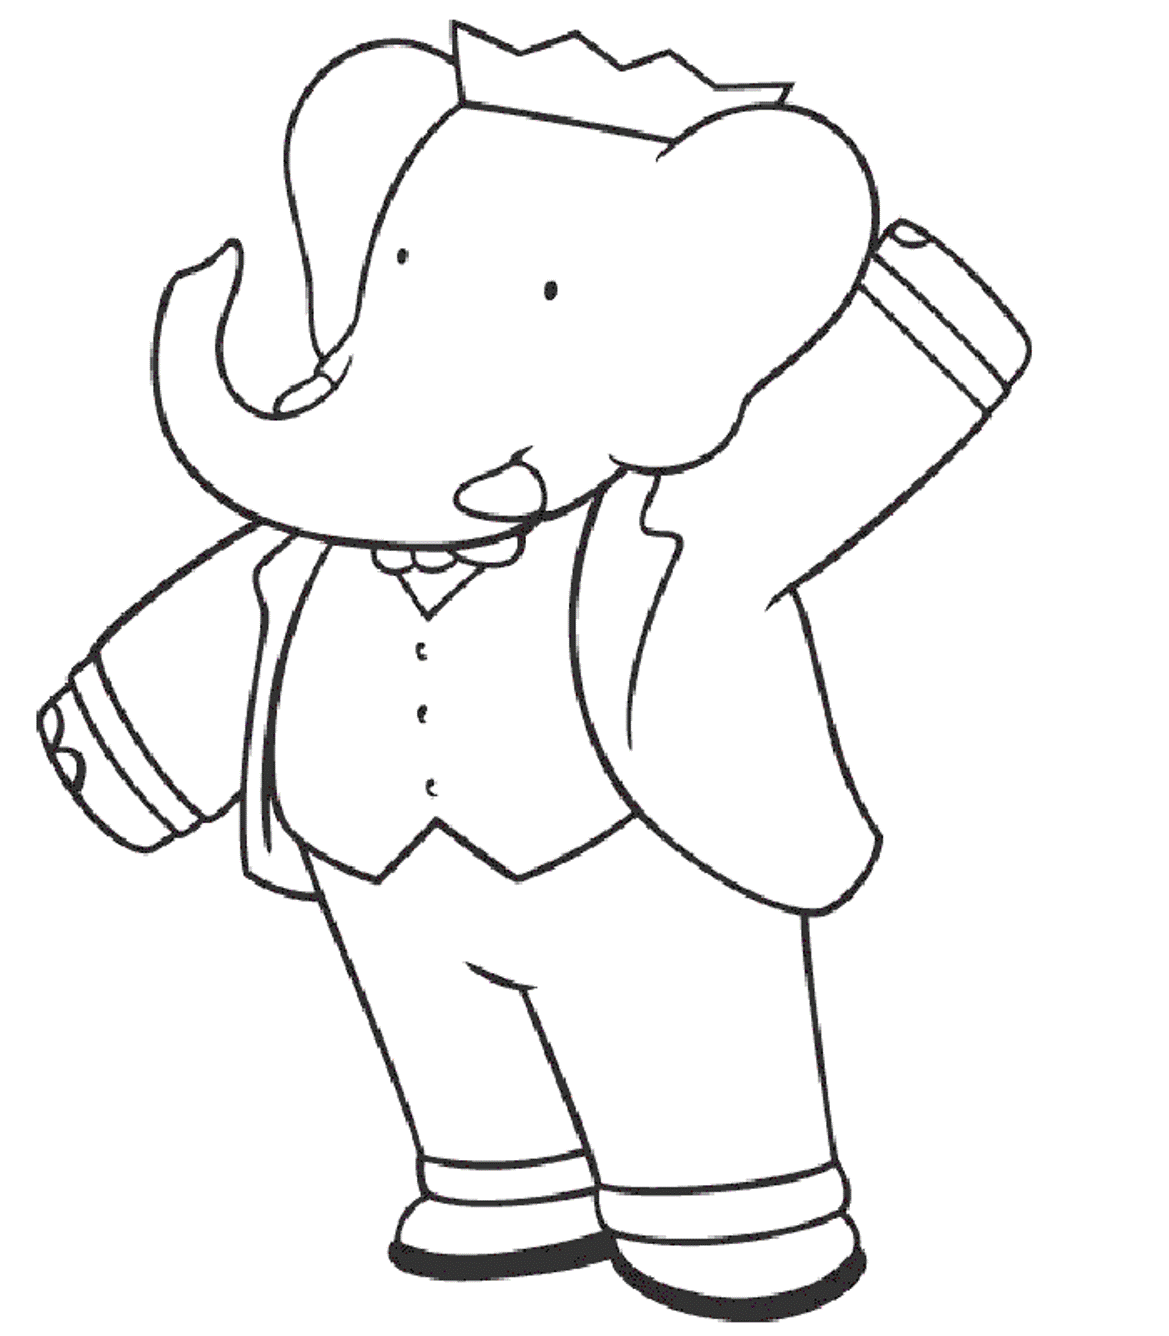 The King Of Babar Free Cartoon Coloring Pages | Cartoon Coloring ...